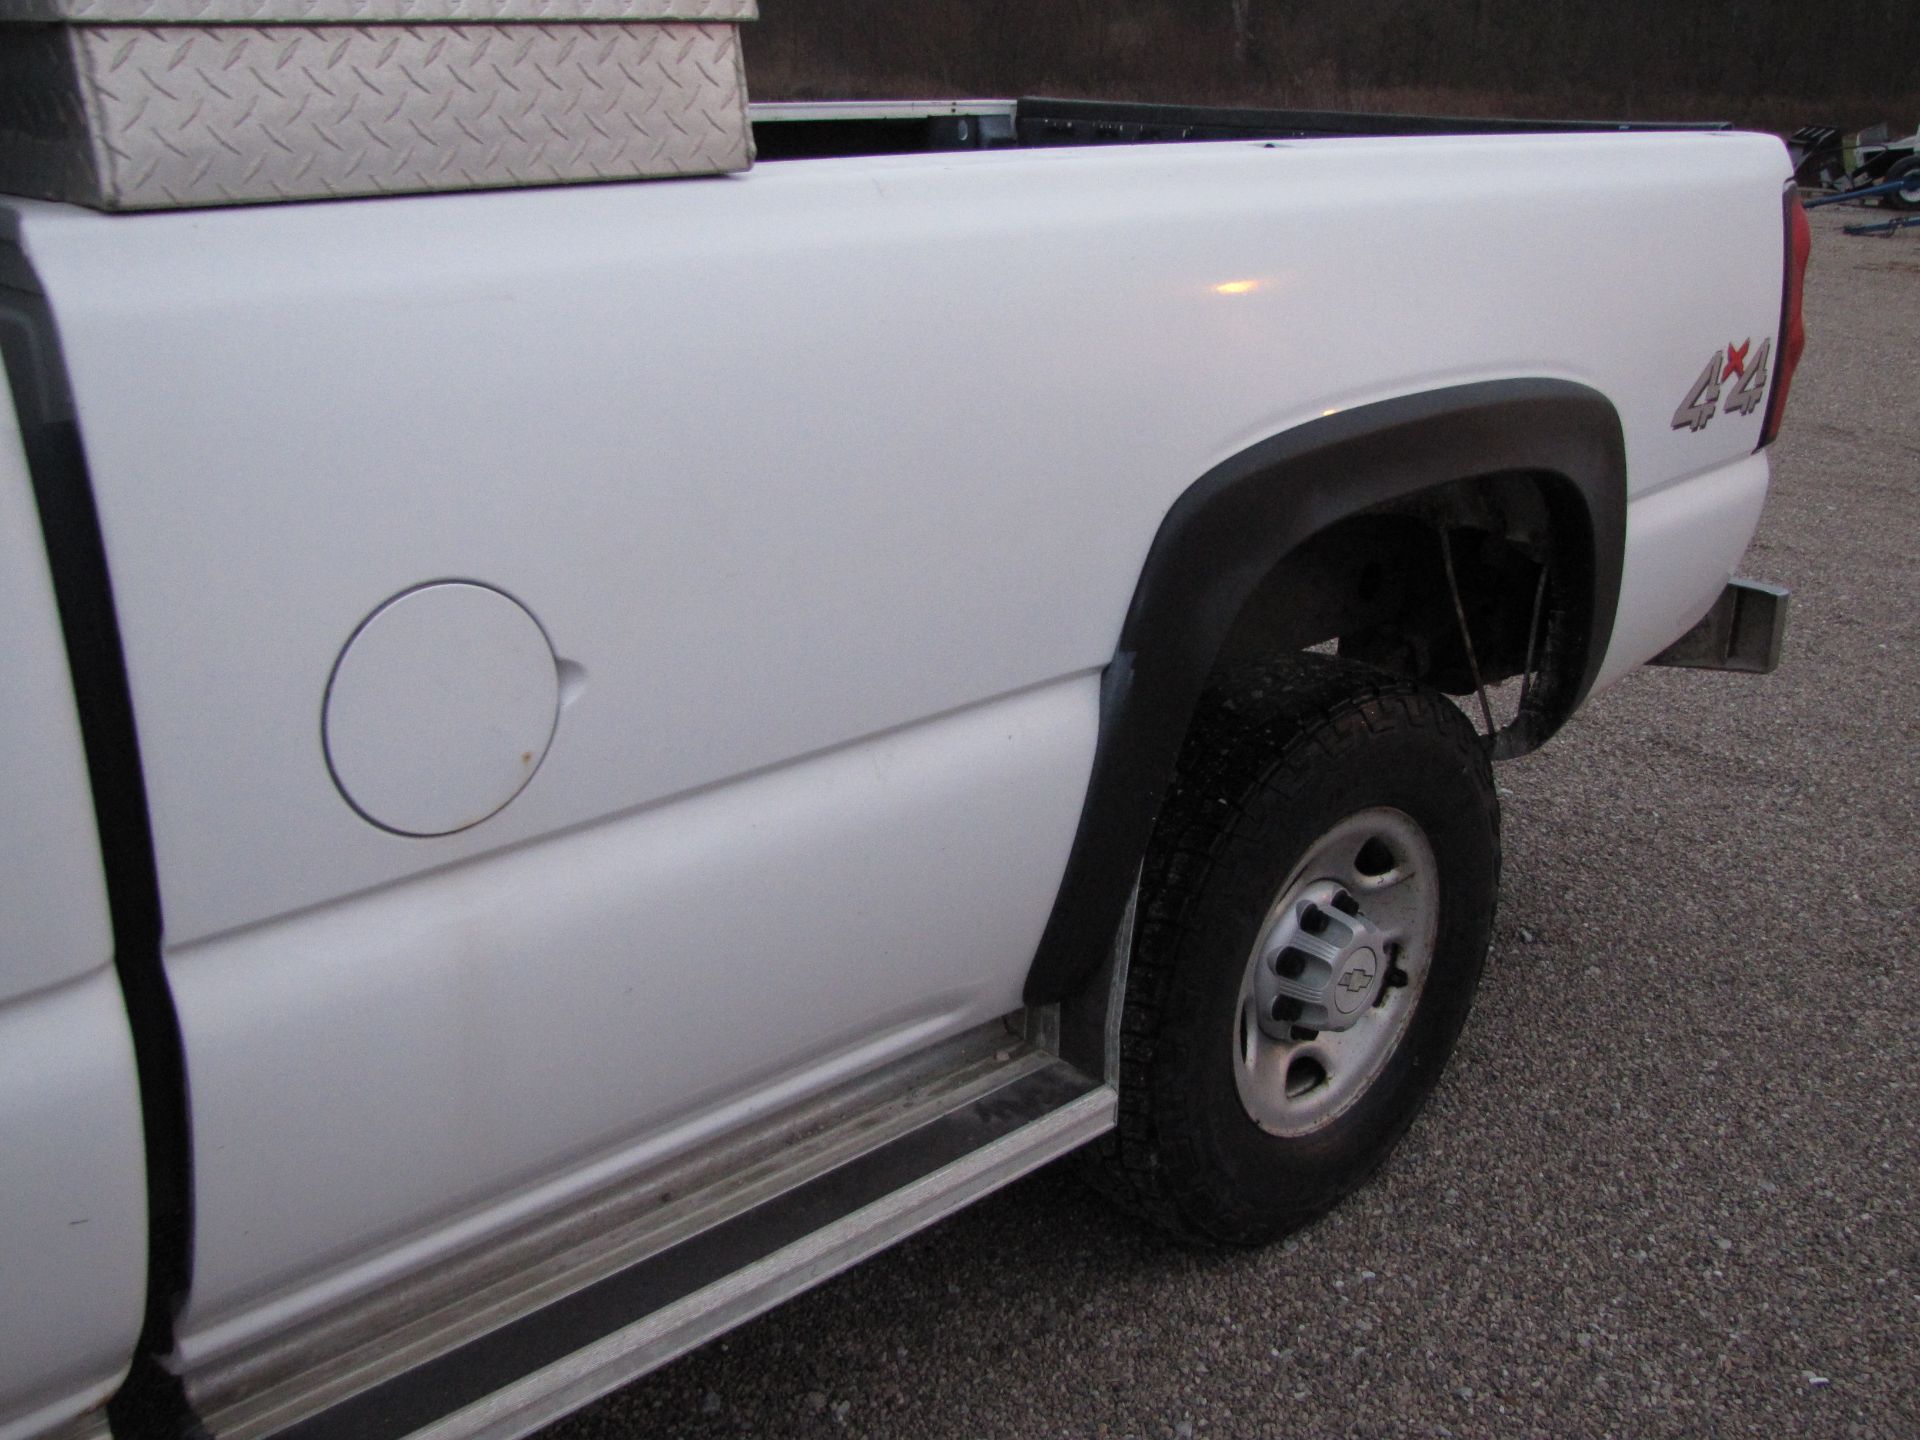 2006 Chevy 2500 HD pickup truck - Image 24 of 65